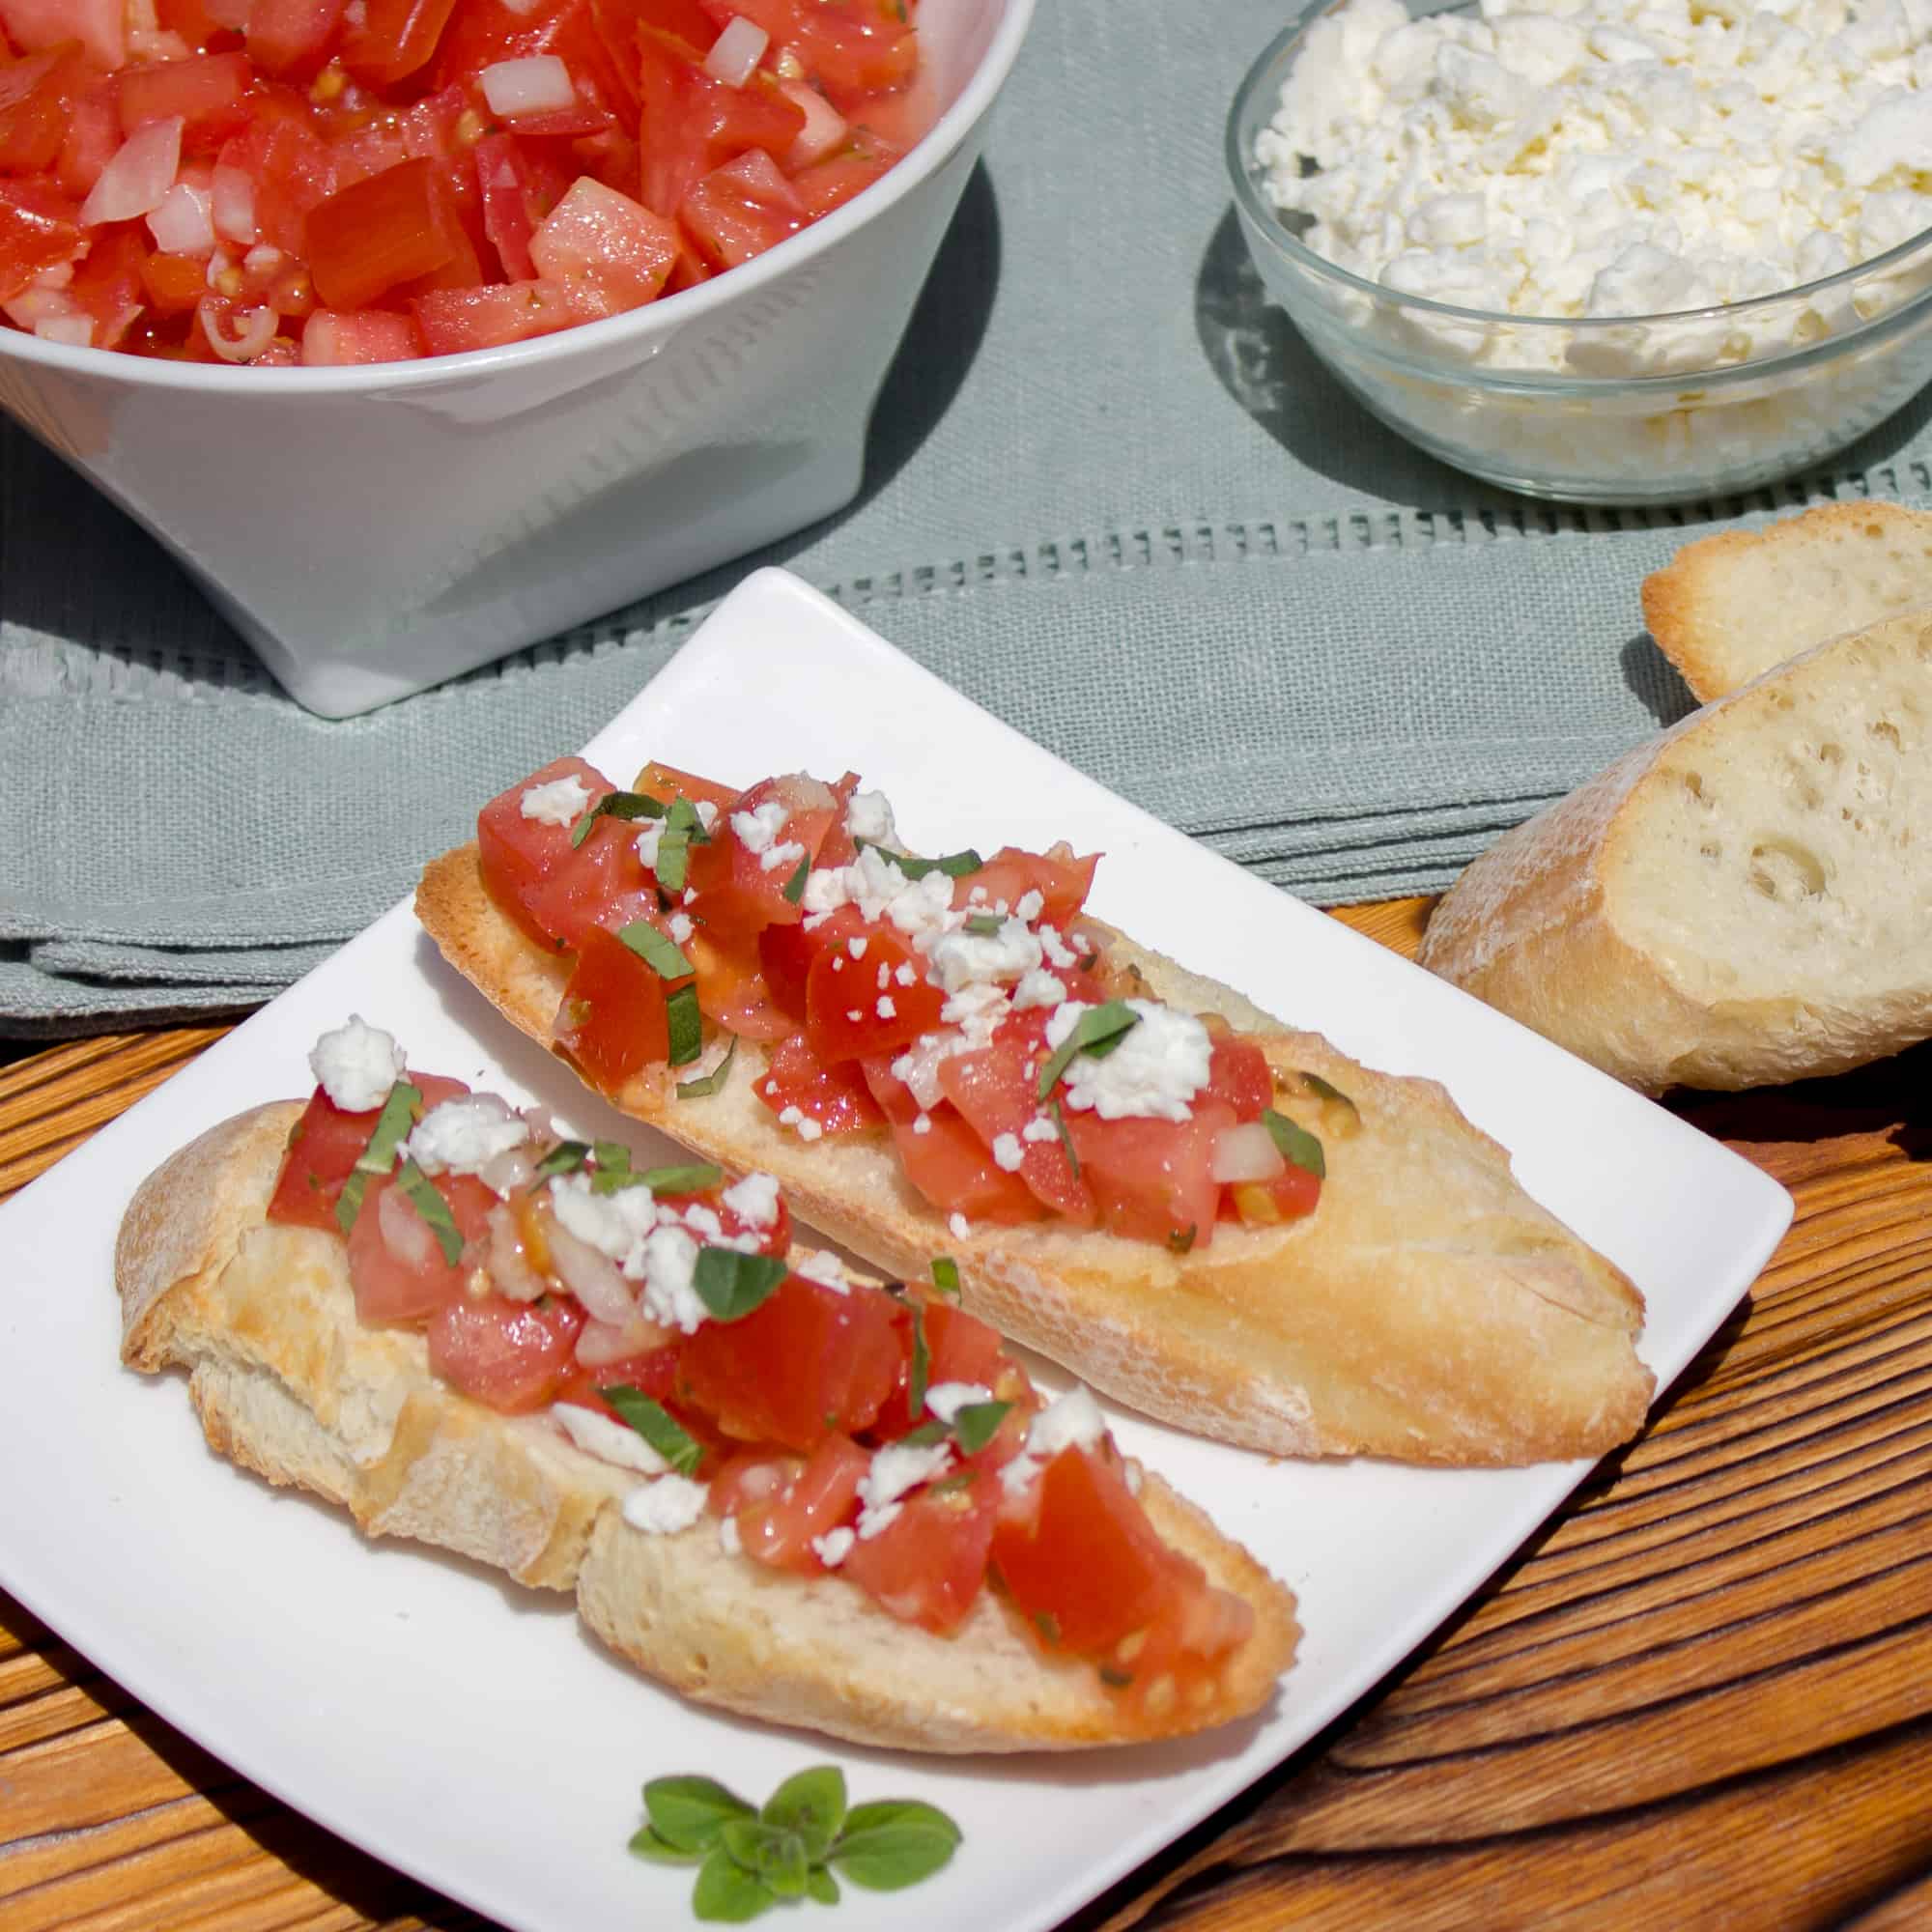 Recipe for how to make bruschetta bread with roma tomatoes, garlic, onion, lemon juice and olive oil. Topped with feta and oregano on a toasted slice of French baguette. 